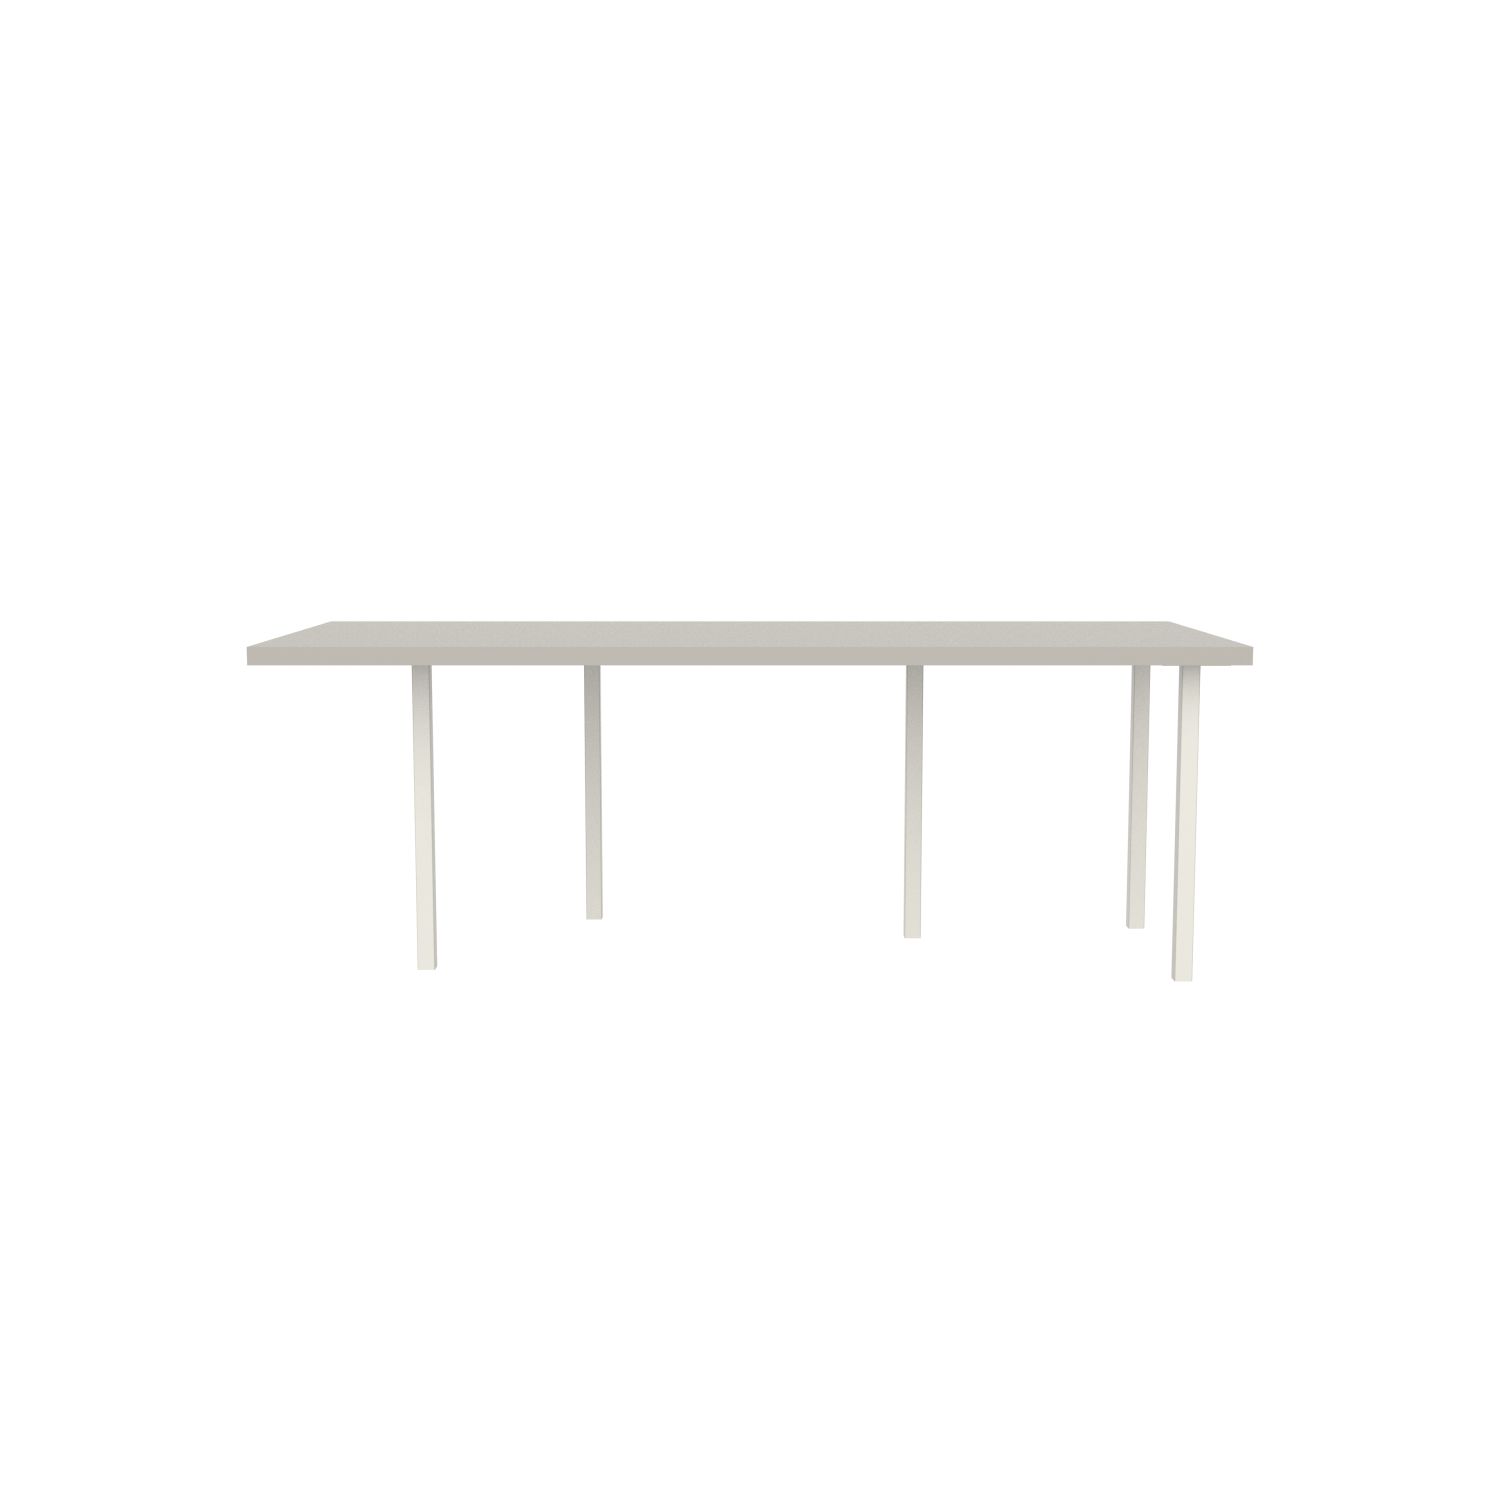 lensvelt bbrand table five fixed heigt 915x218 hpl white 50 mm price level 1 white ral9010